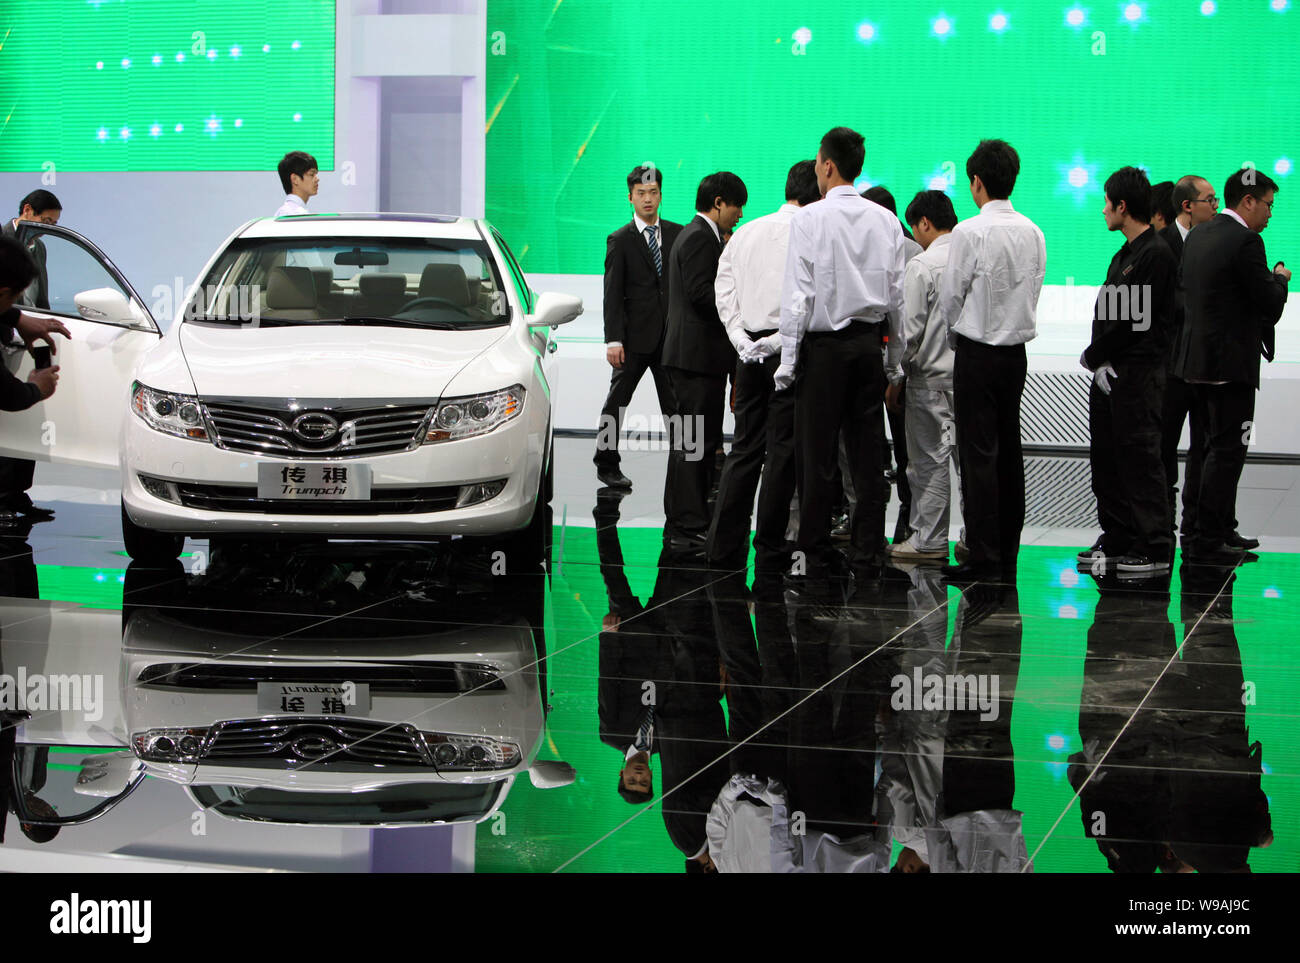 A Trumpchi of Guangzhou Auto is seen on display during the 8th China (Guangzhou) International Automobile Exhibition, known as Auto Guangzhou 2010, in Stock Photo